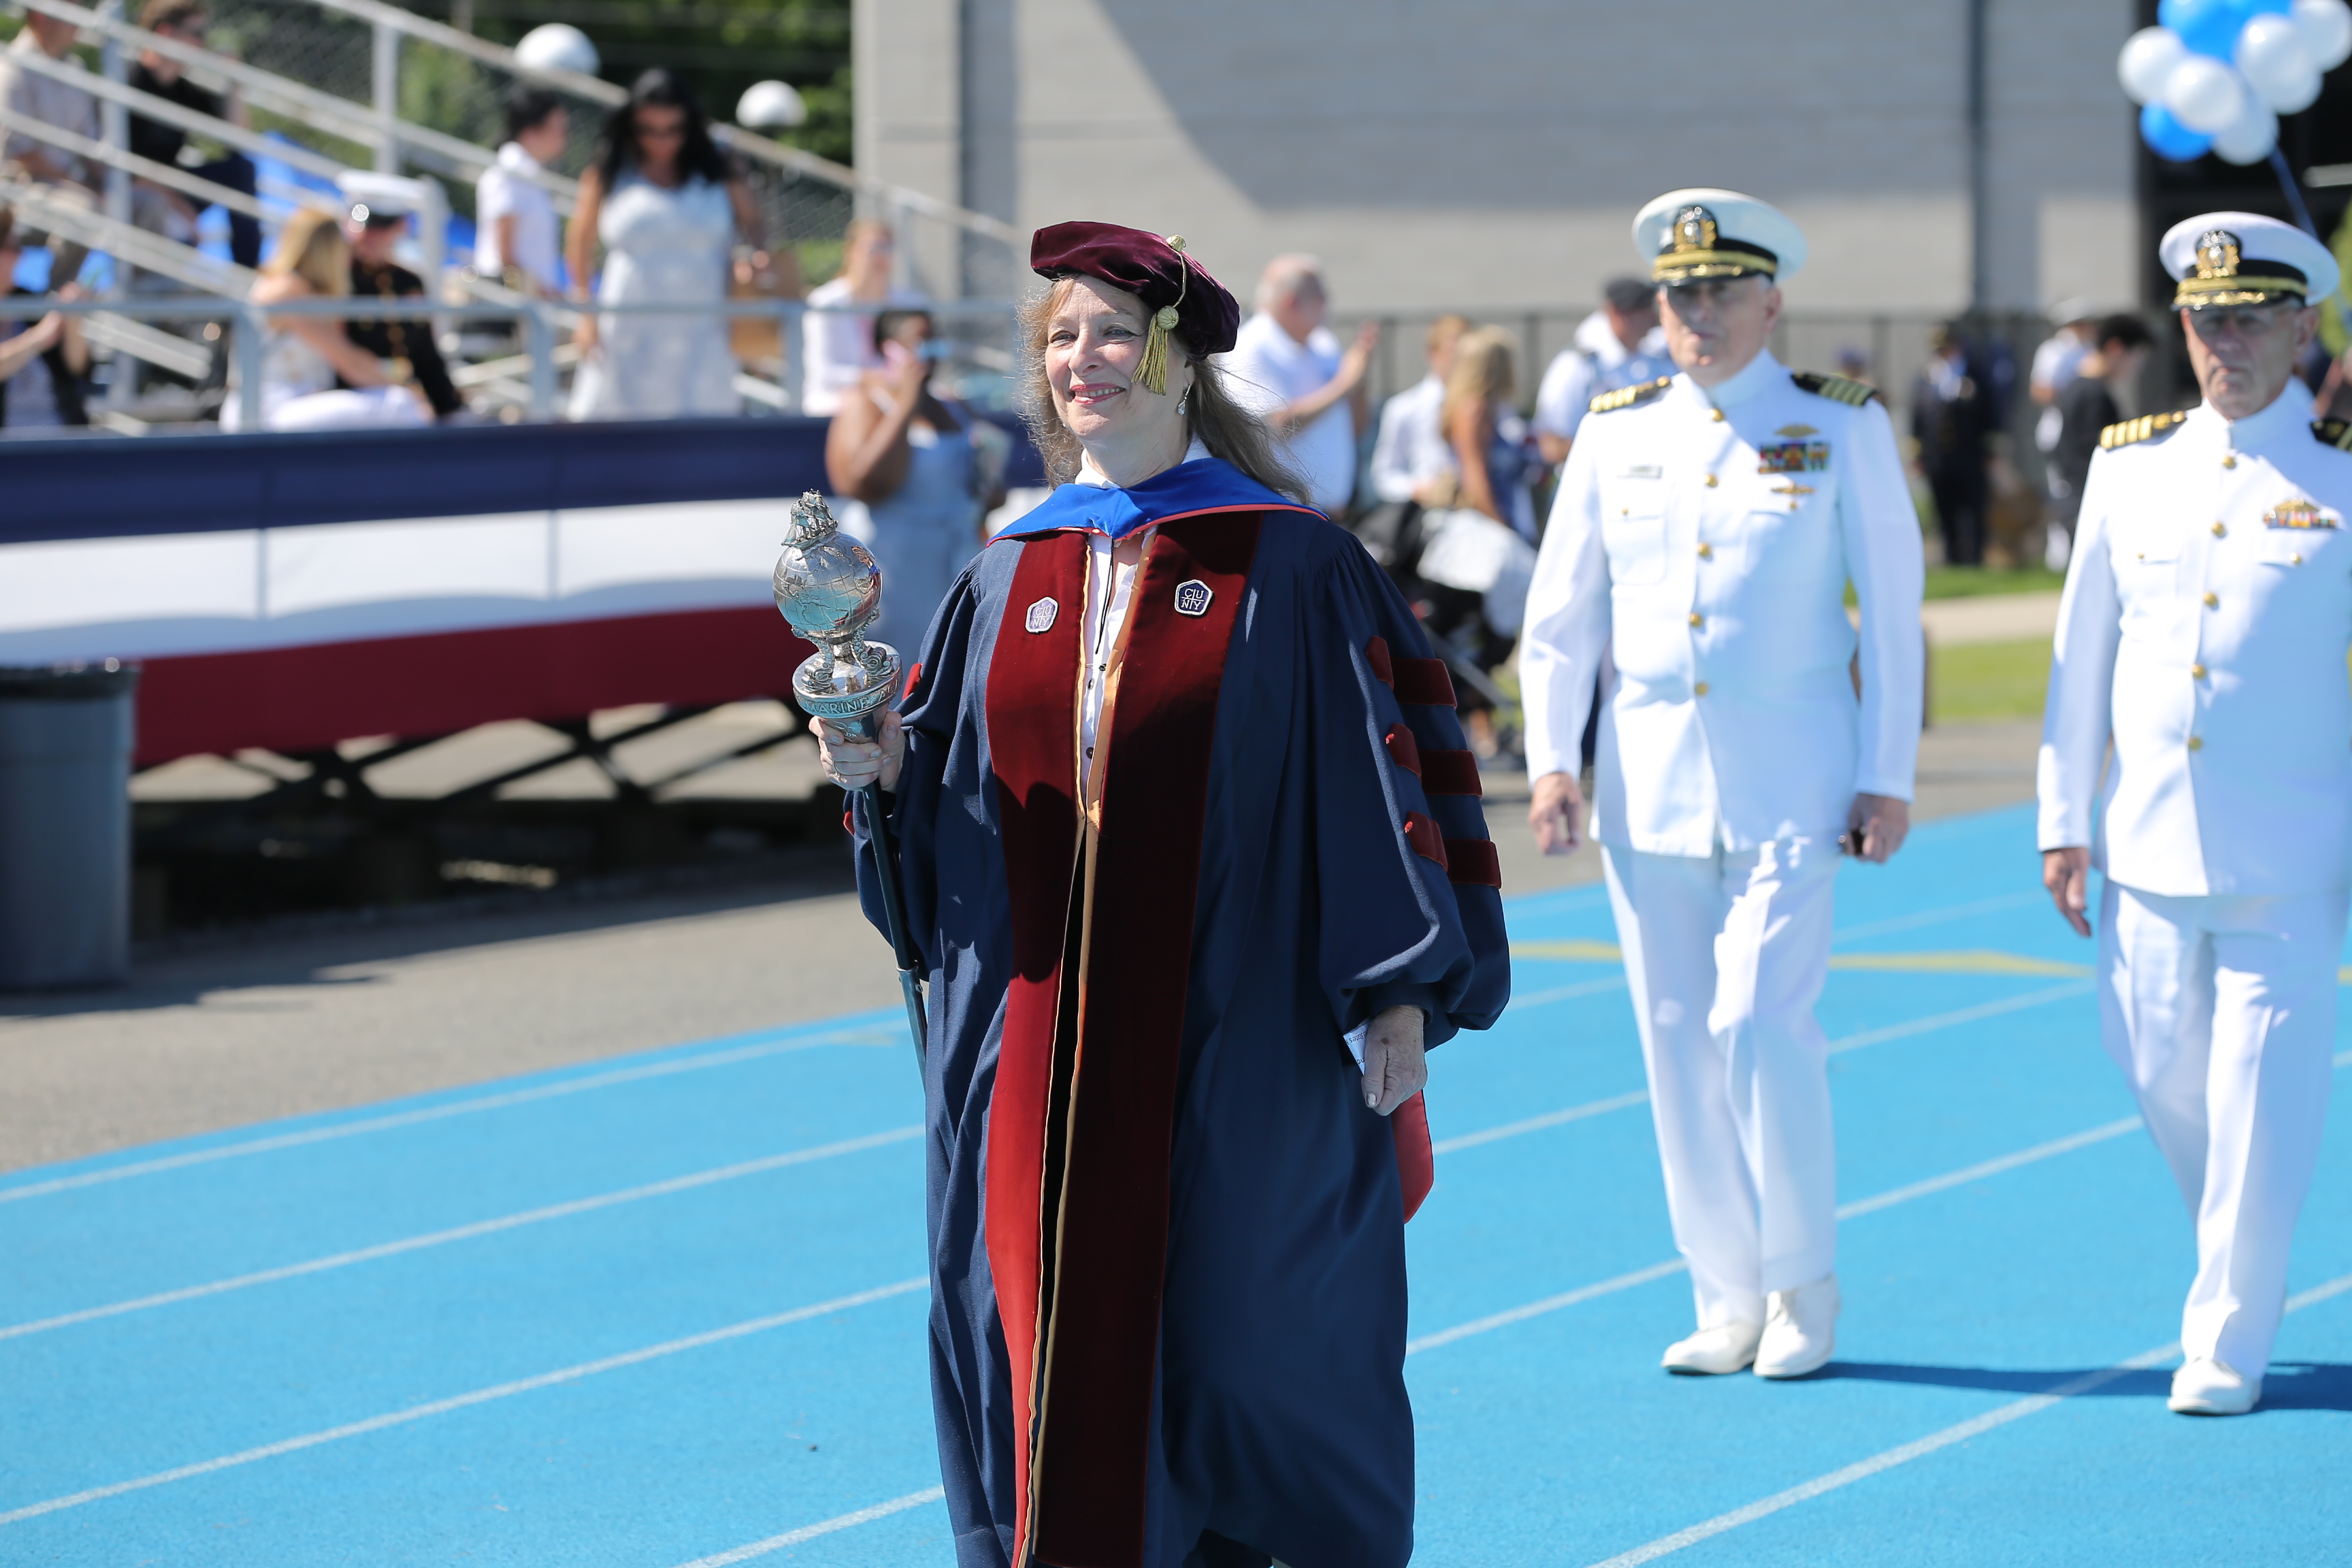 Dr. Magnus leads the faculty as USMMA's first woman mace bearer